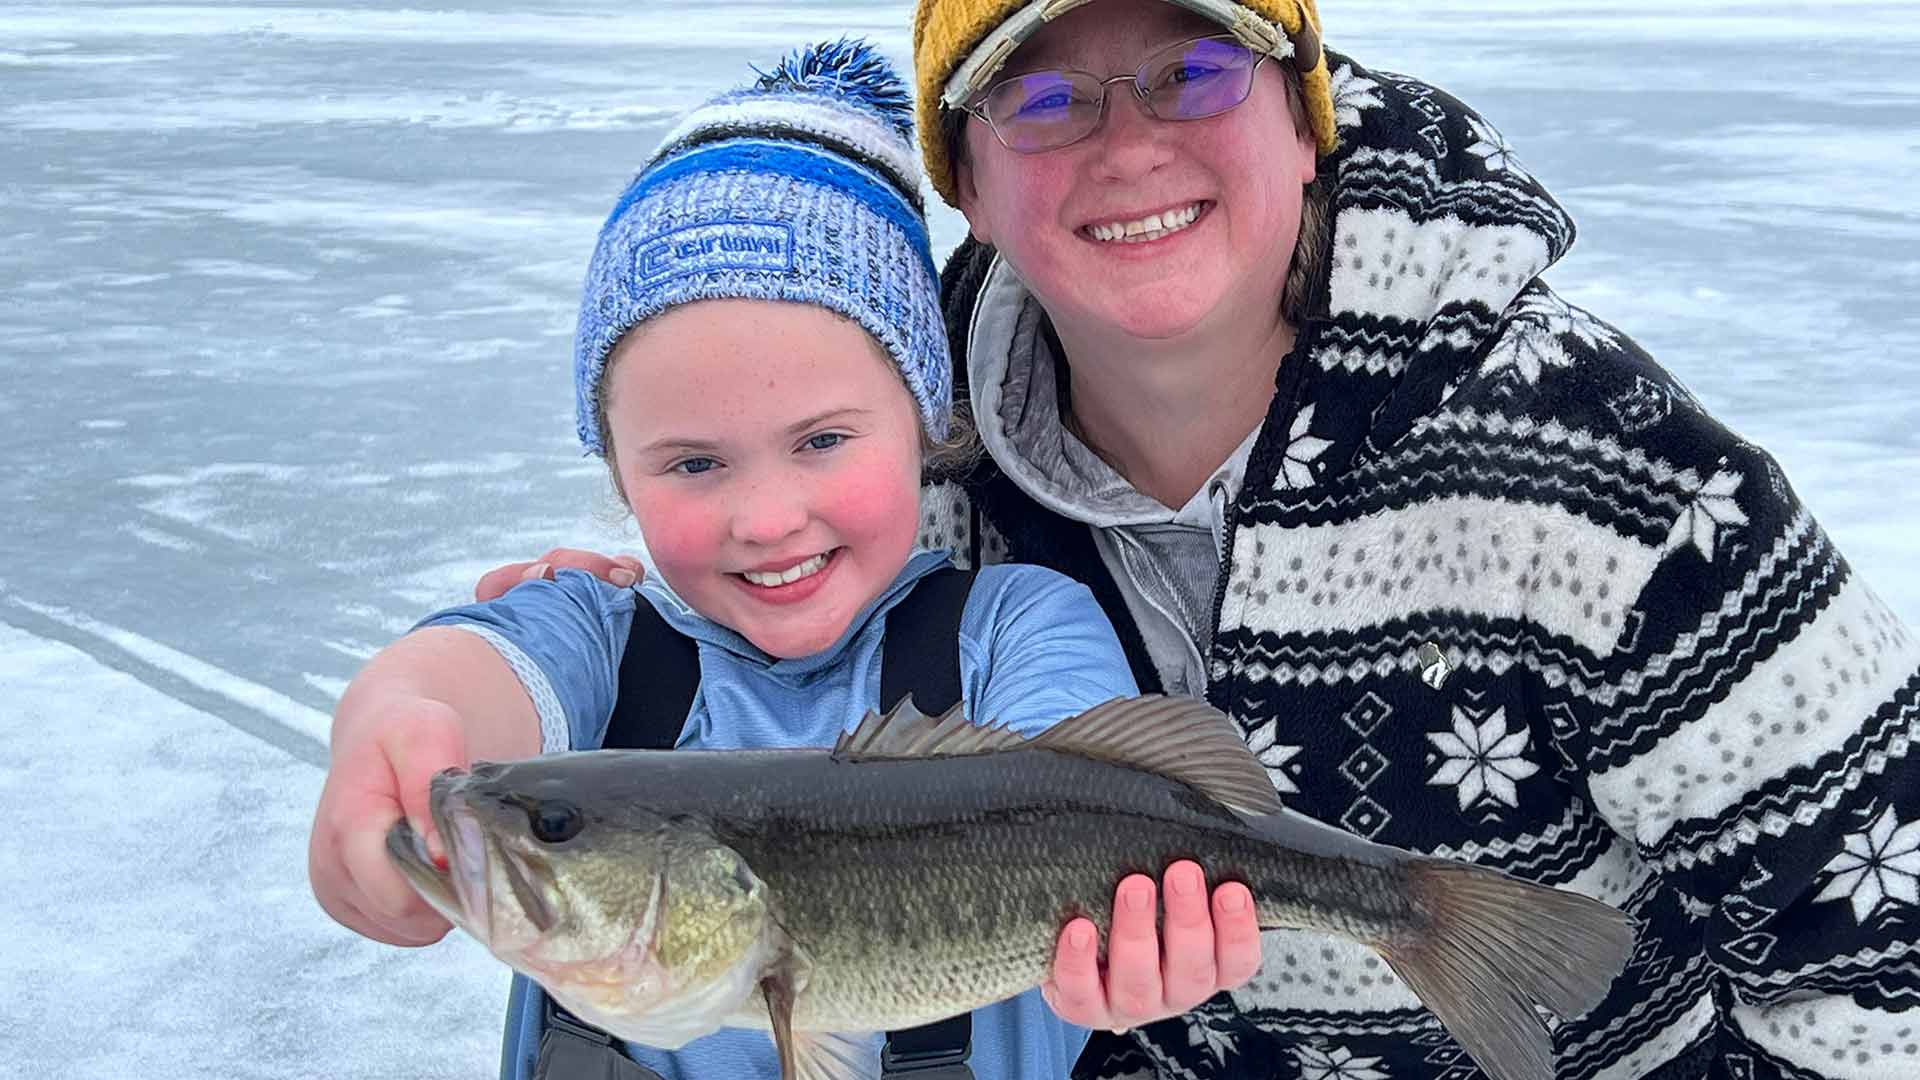 Never Ice Fished Devils Lake? These Tips will Make it Easy